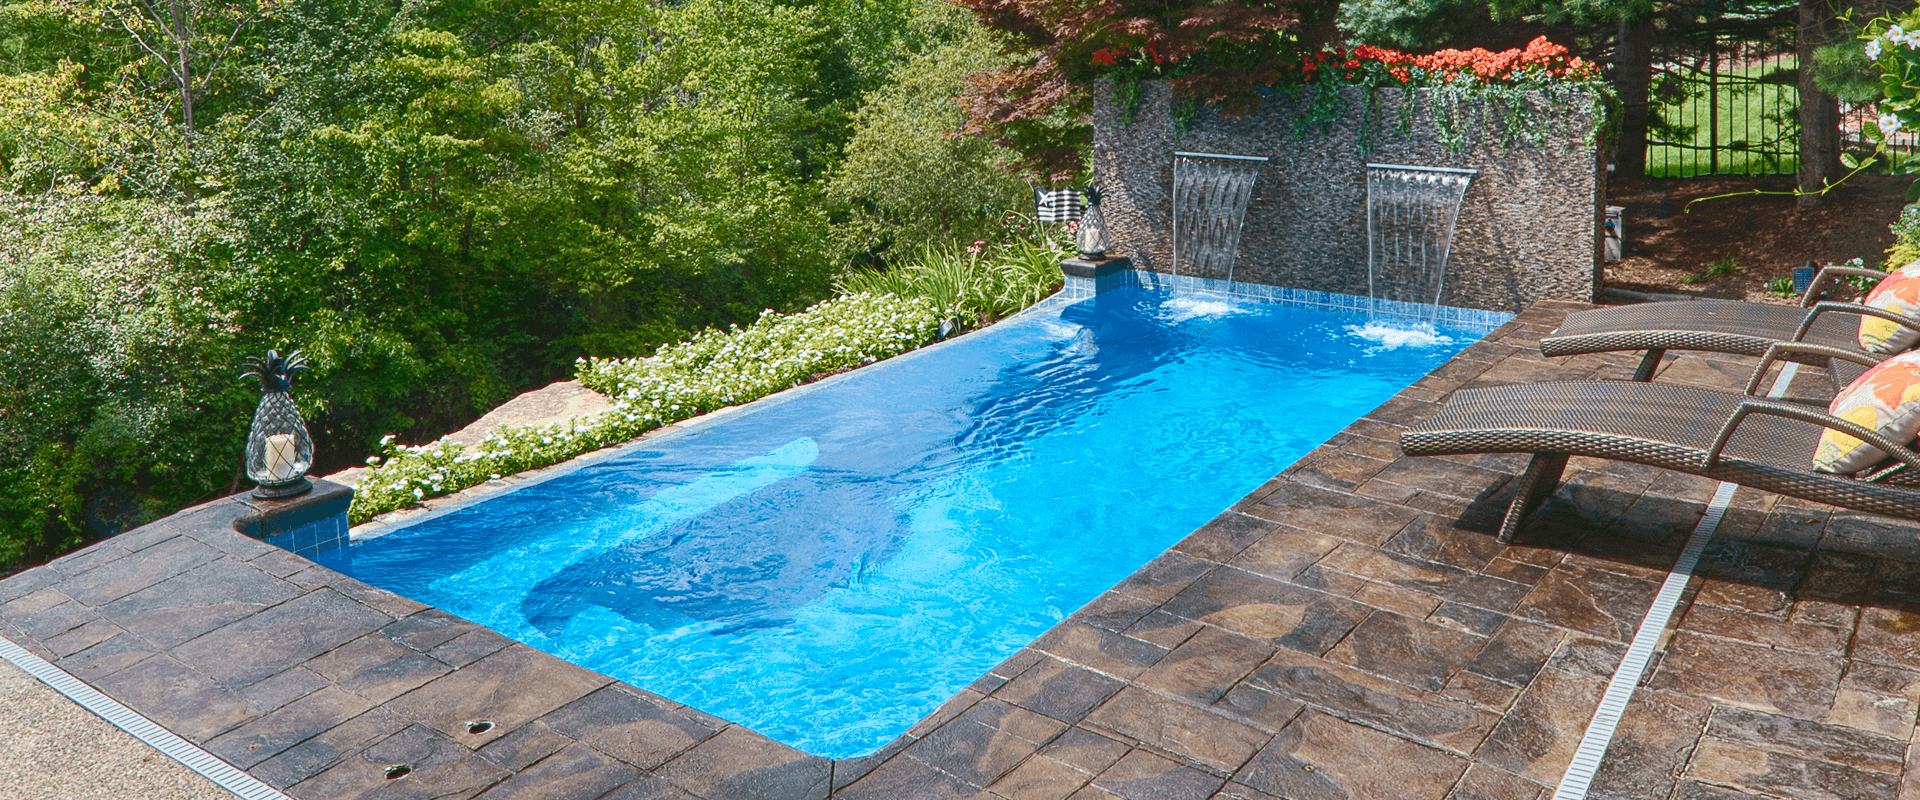 Fiberglass Pools: Everything You Need to Know | Thursday Pools